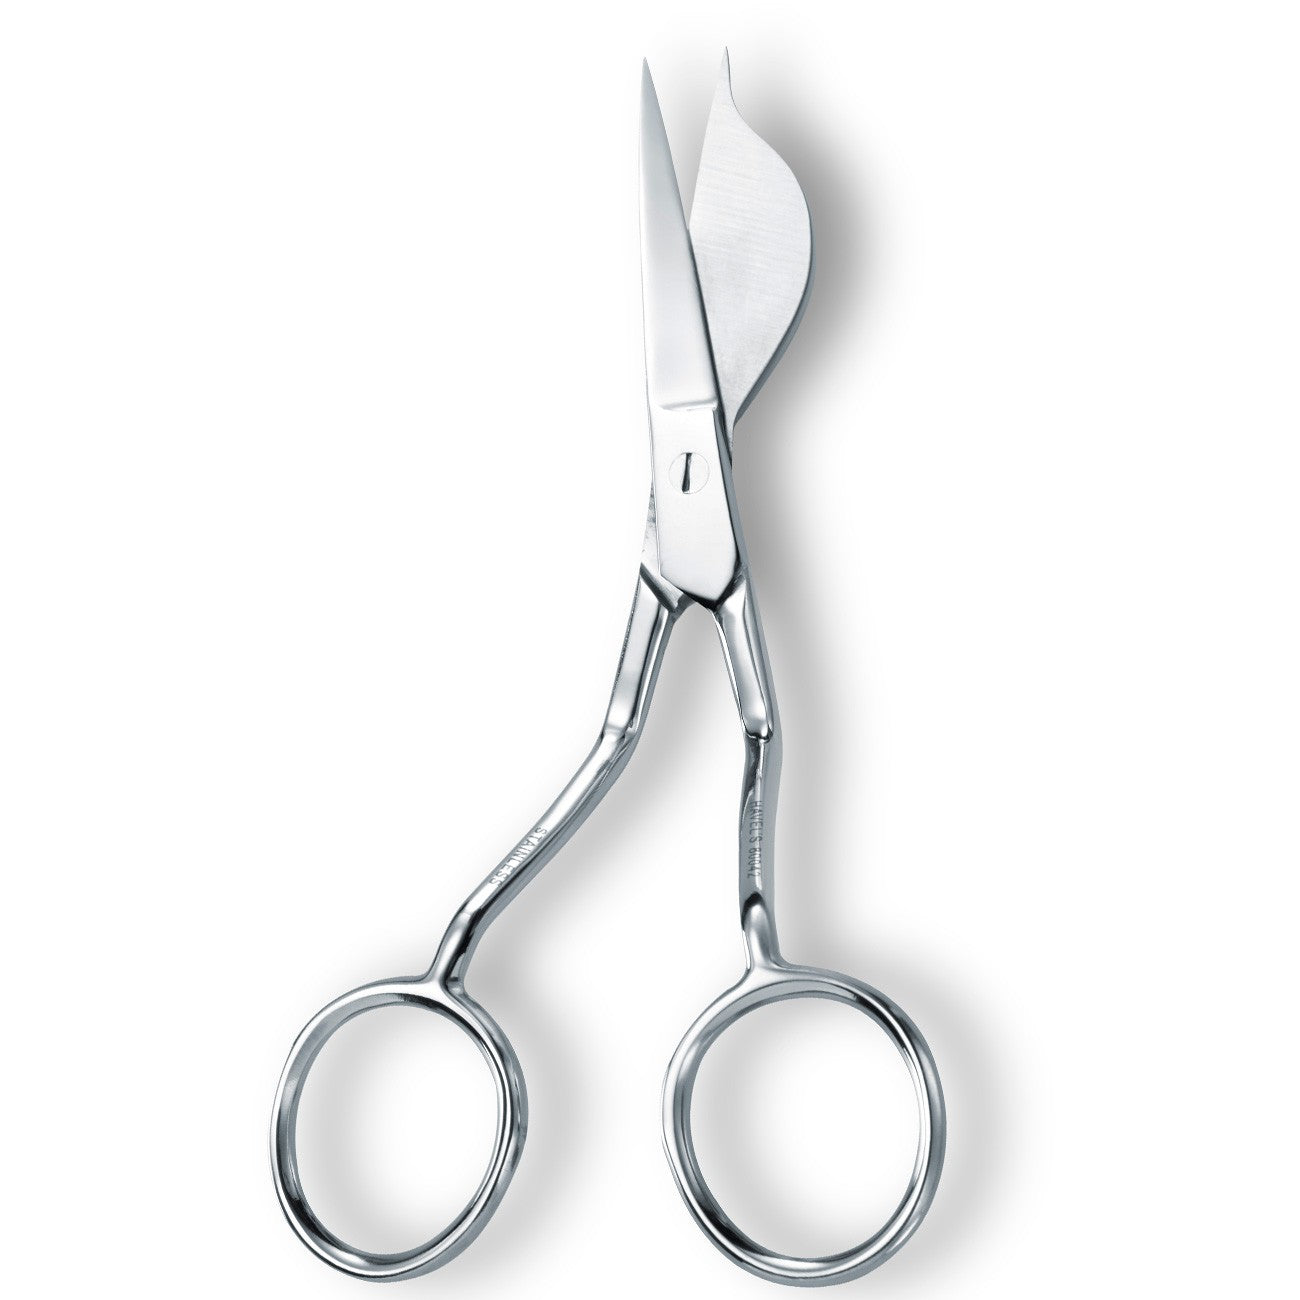 Havels Double Pointed Duckbill Applique Scissors 6in